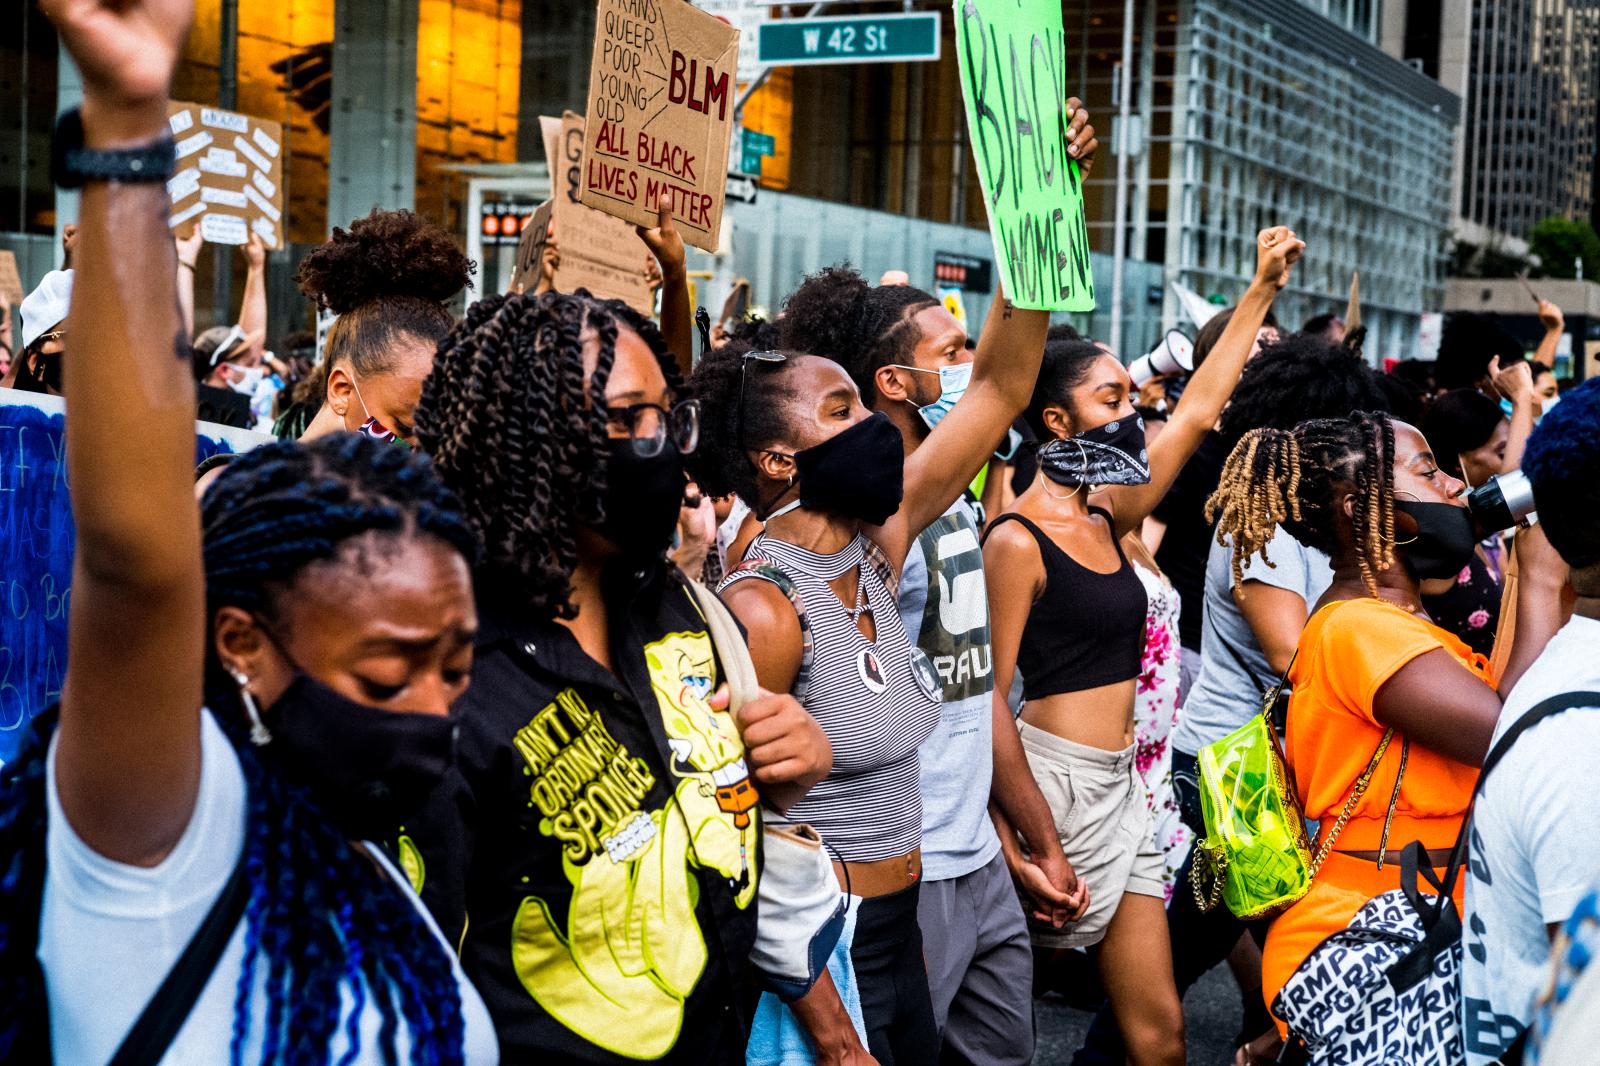 Image from Black Lives Matter -  July 26, 2020  Midtown, Manhattan NYC 